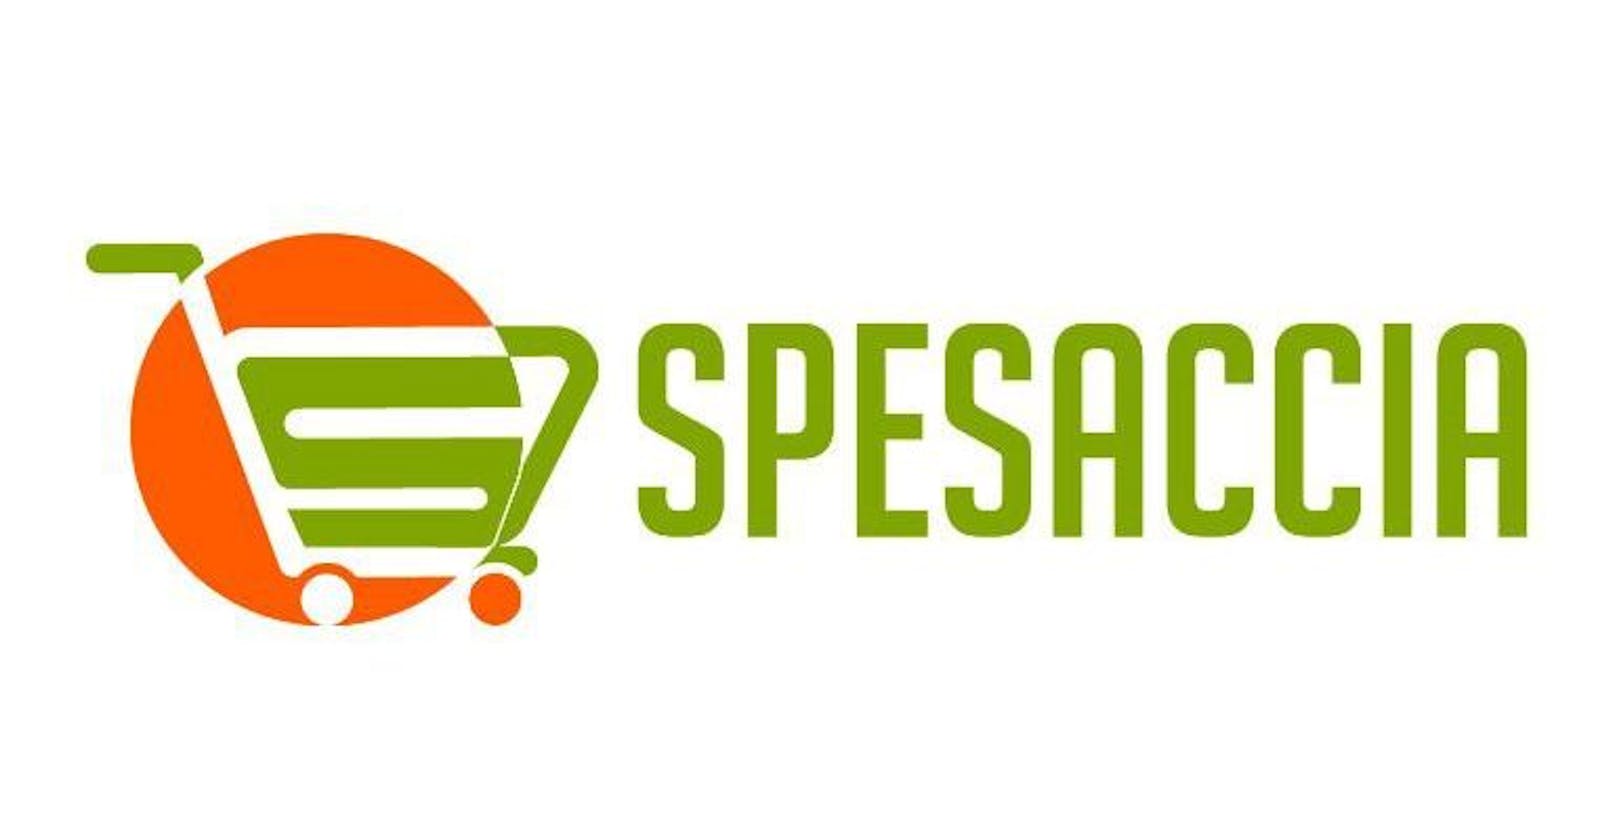 Introducing Spesaccia.com : the new way of shopping !